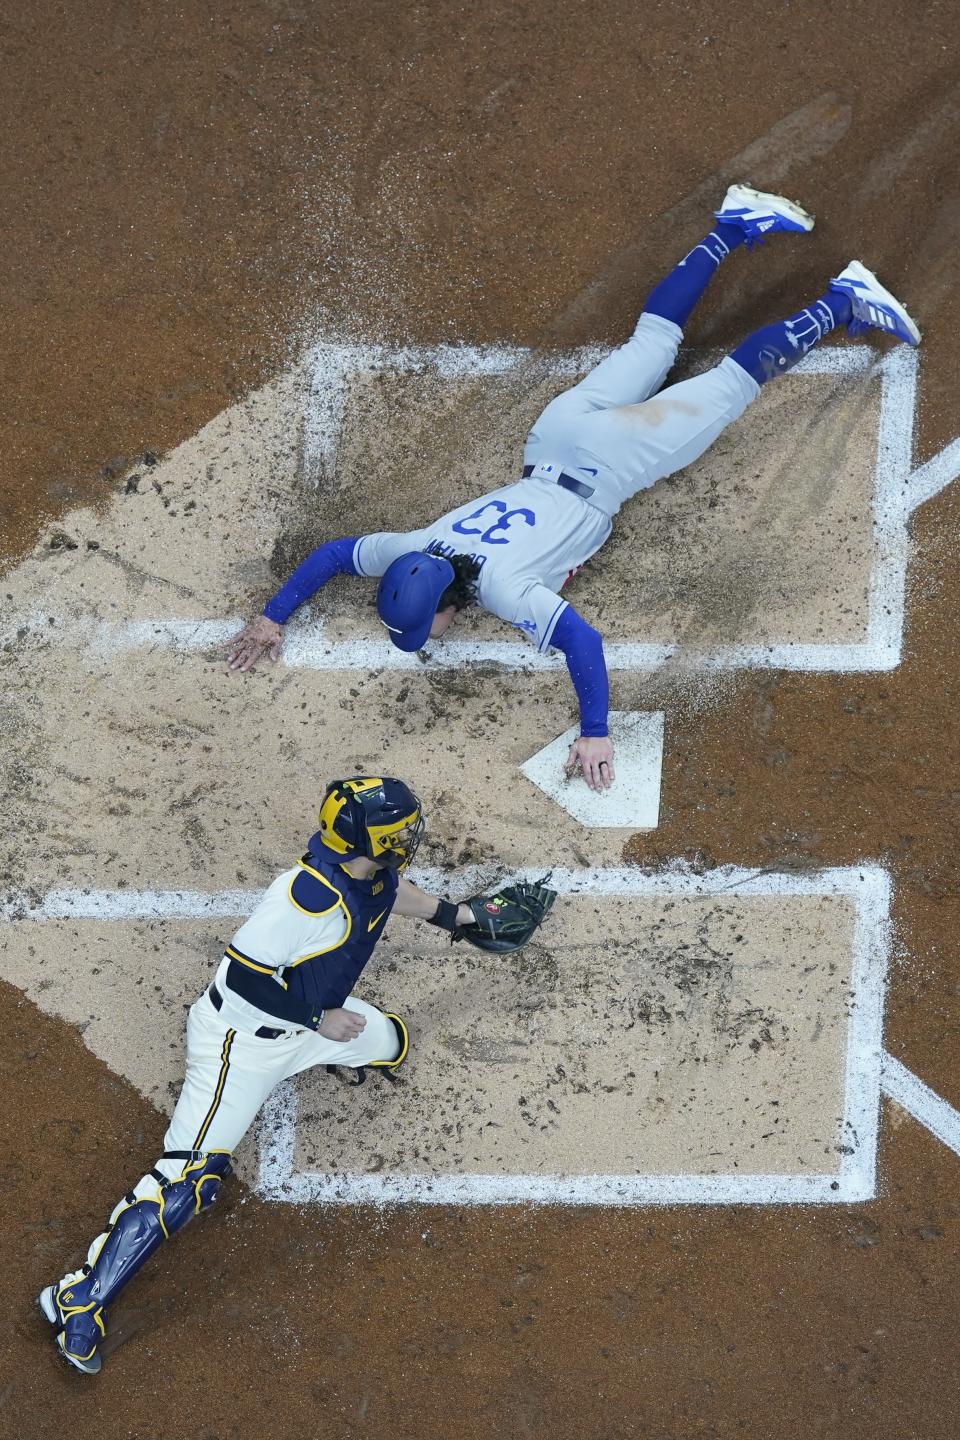 Los Angeles Dodgers' James Outman scores safely past Milwaukee Brewers catcher Victor Caratini during the second inning of a baseball game Tuesday, May 9, 2023, in Milwaukee. Outman scored from second on a hoit by Miguel Rojas. (AP Photo/Morry Gash)